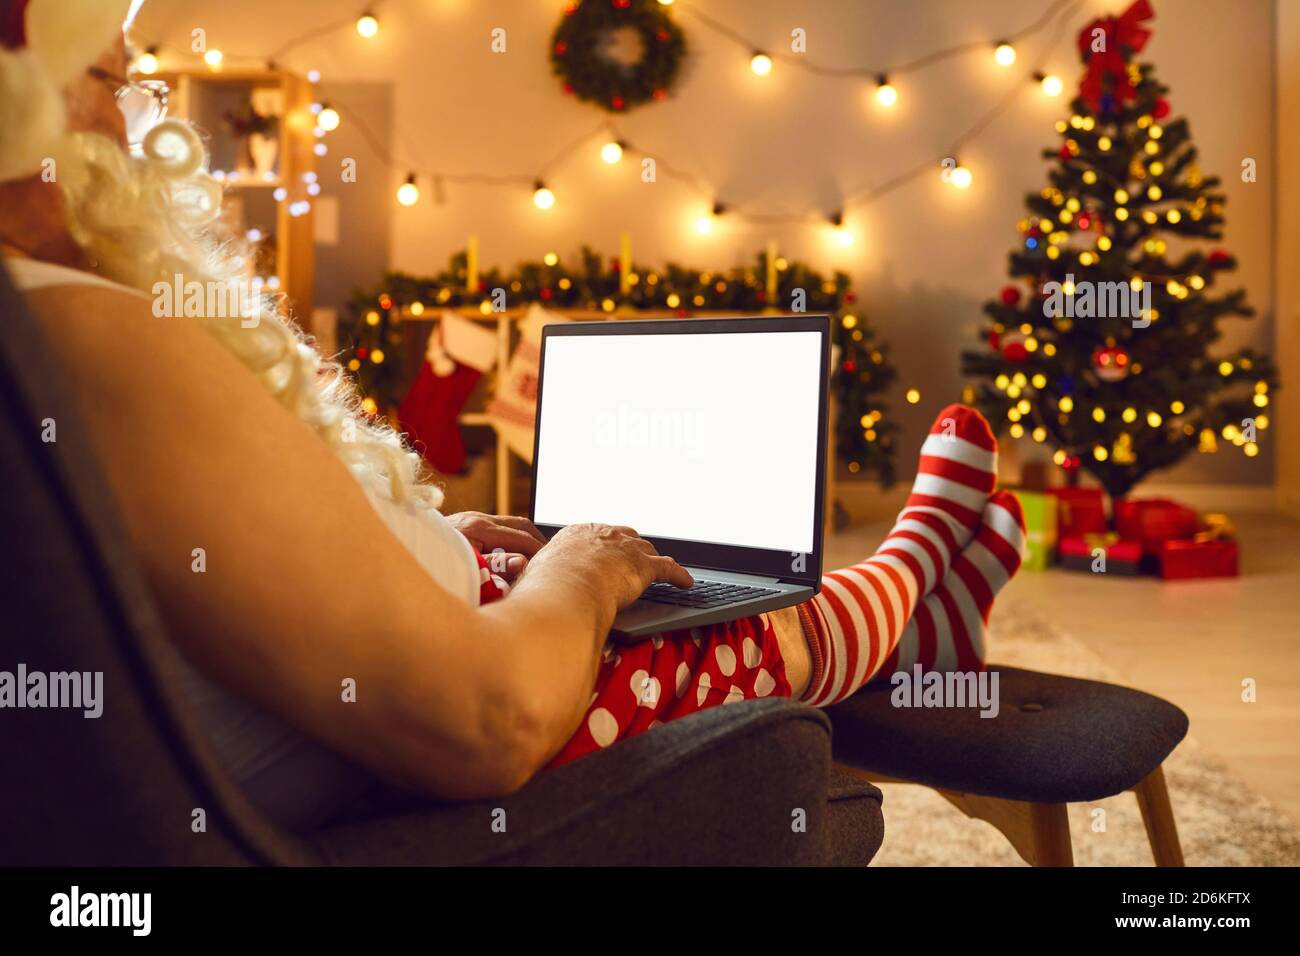 Santa in costume with white beard communicating online on laptop with space for text on screen Stock Photo